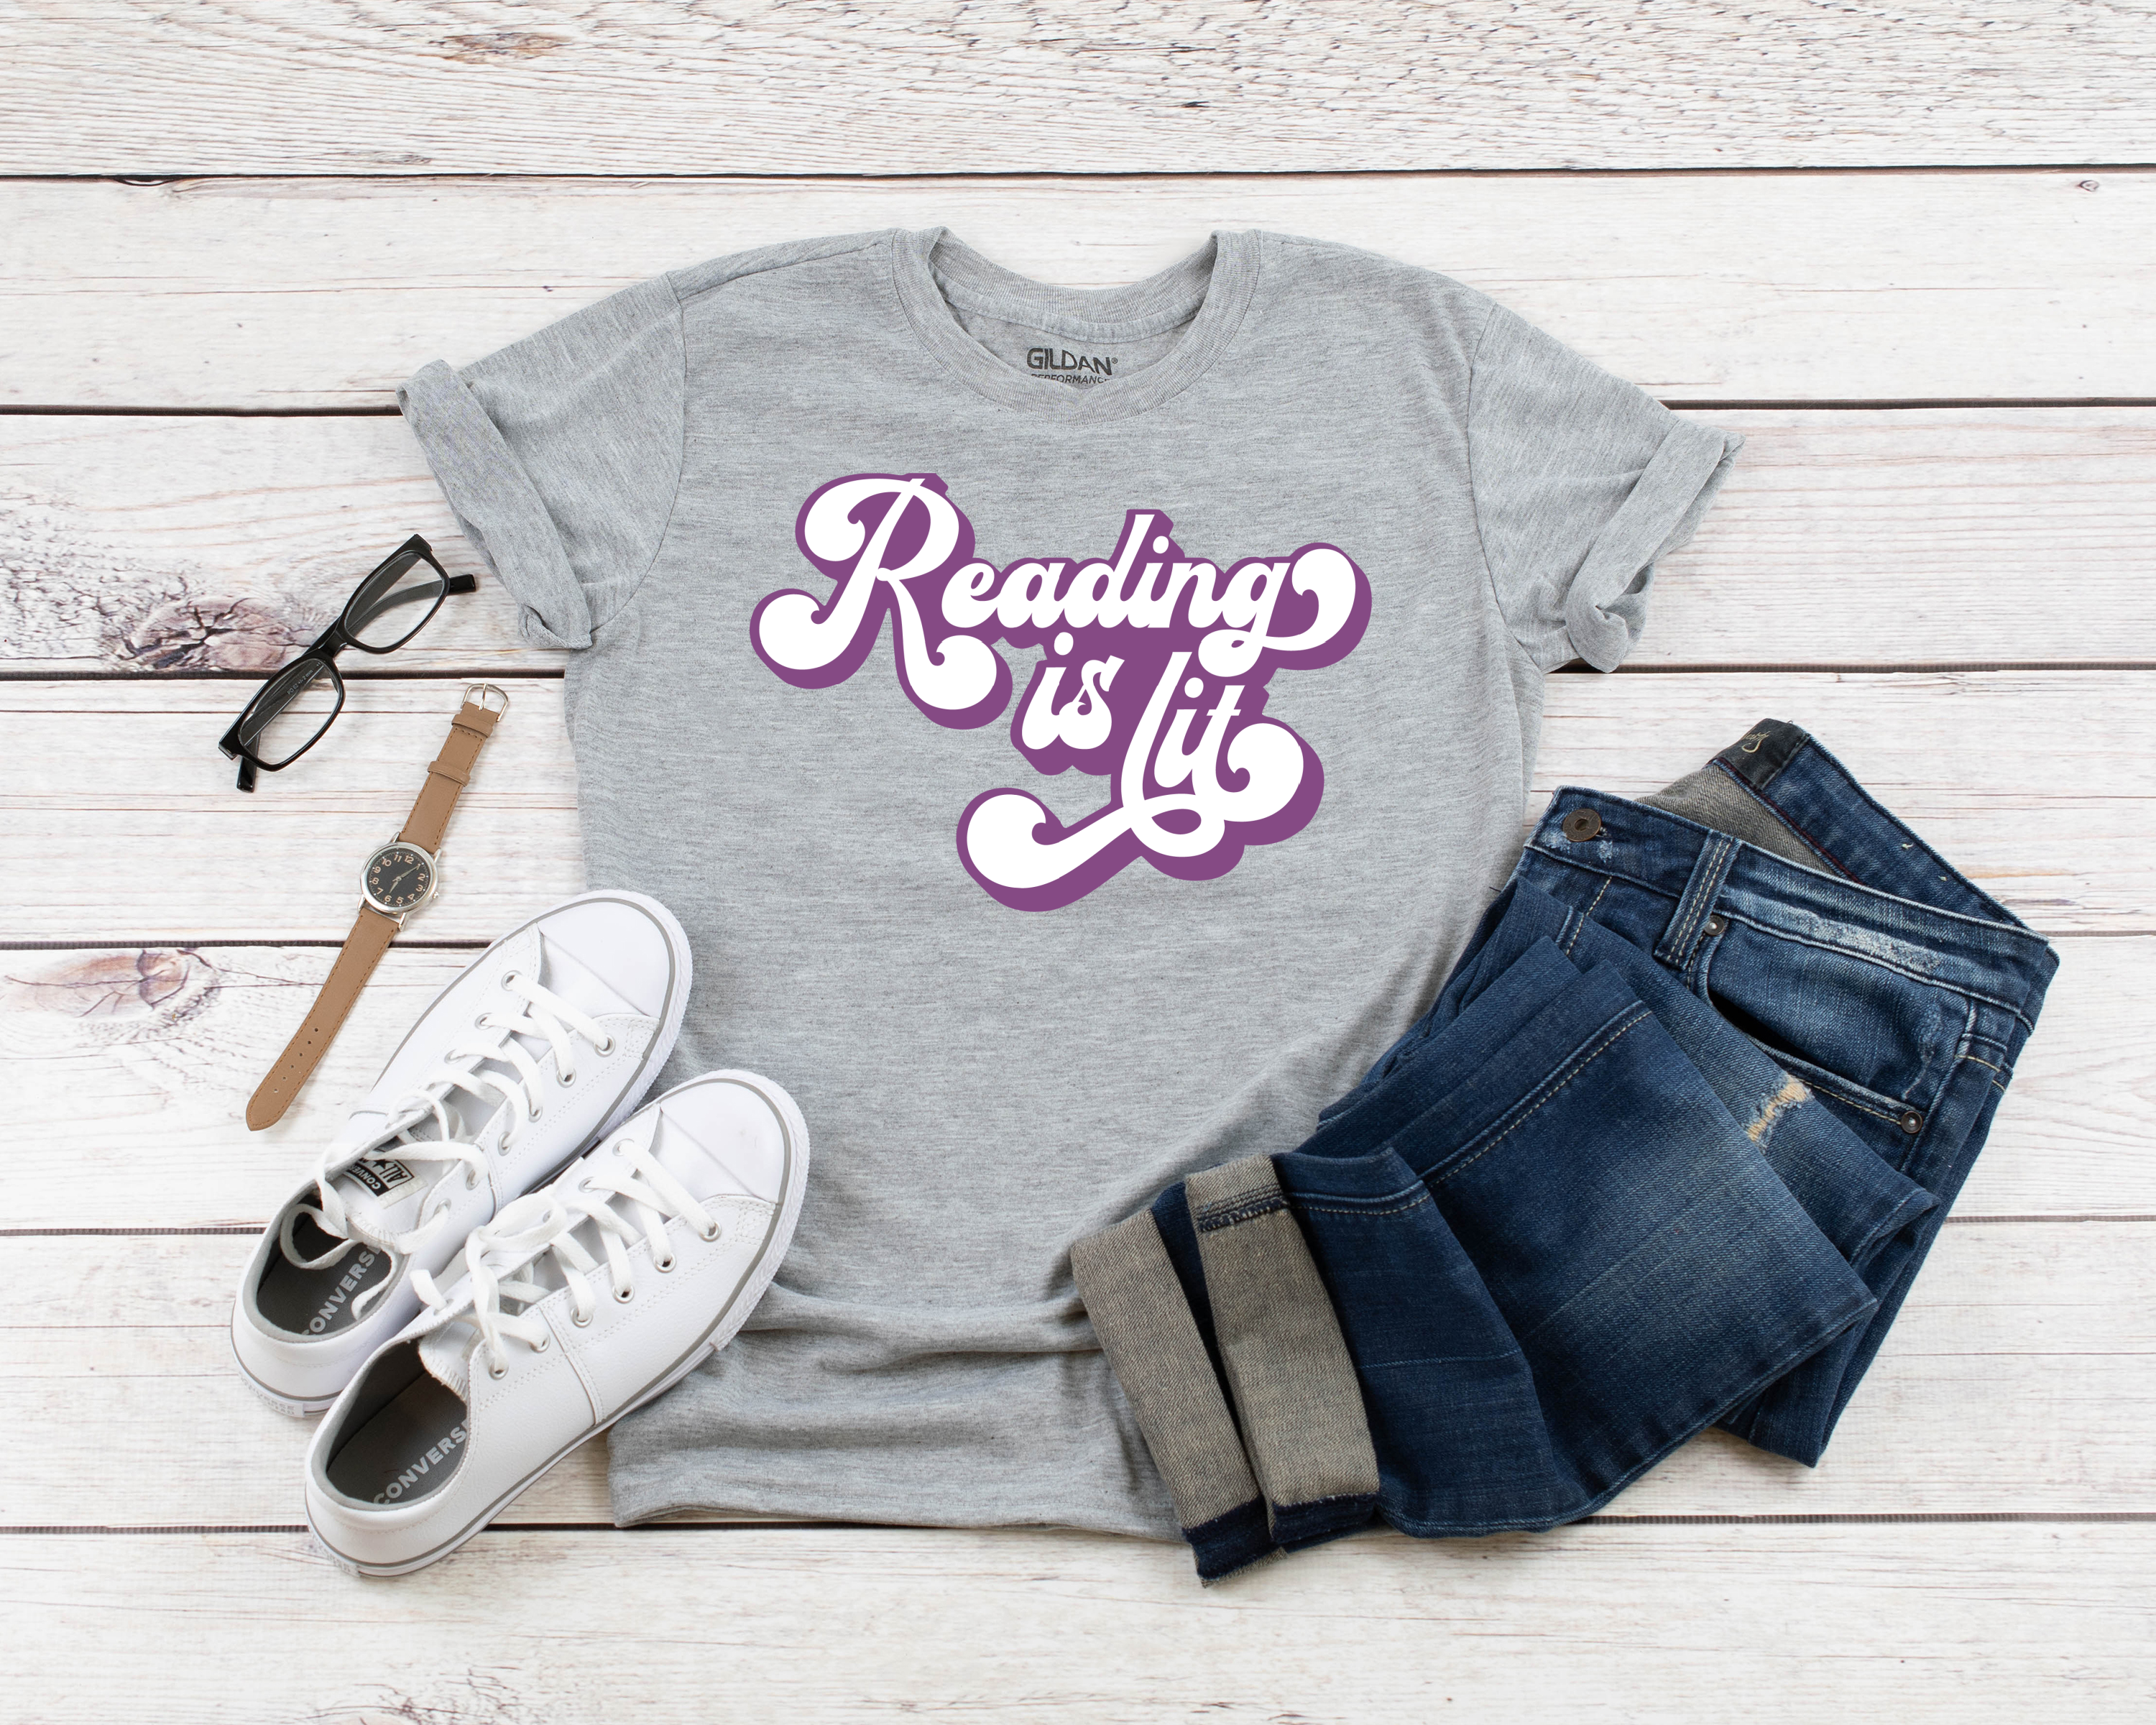 Grey t-shirt with Reading is Lit SVG near jeans, white shoes, glasses and a watch